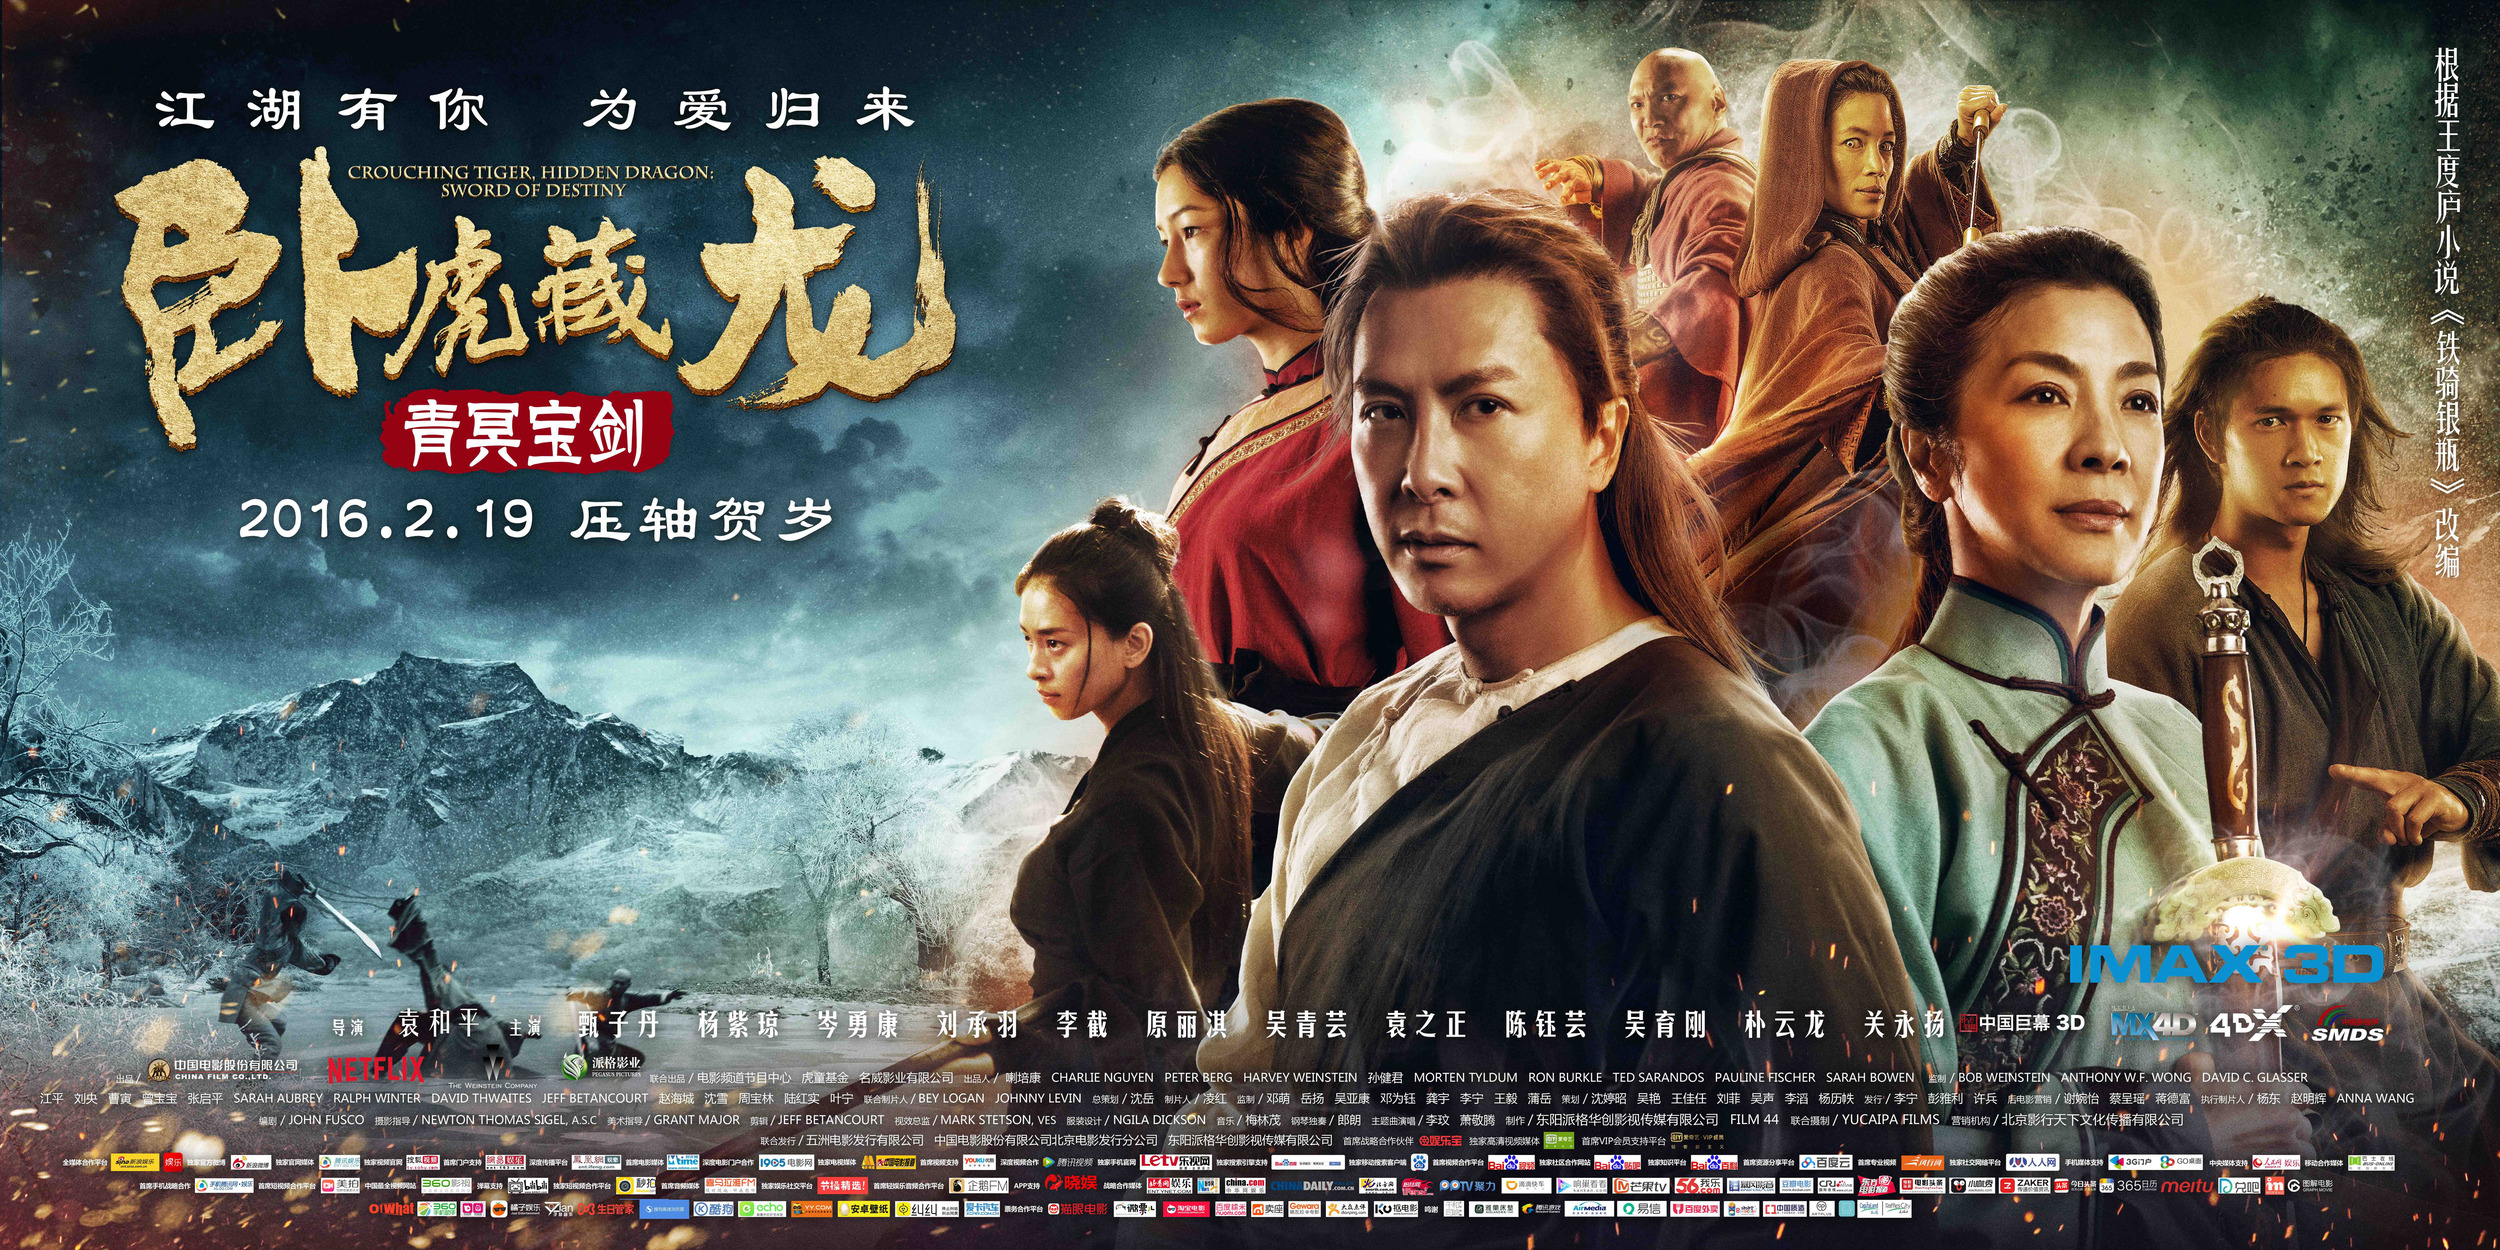 Mega Sized Movie Poster Image for Crouching Tiger, Hidden Dragon: Sword of Destiny (#14 of 16)